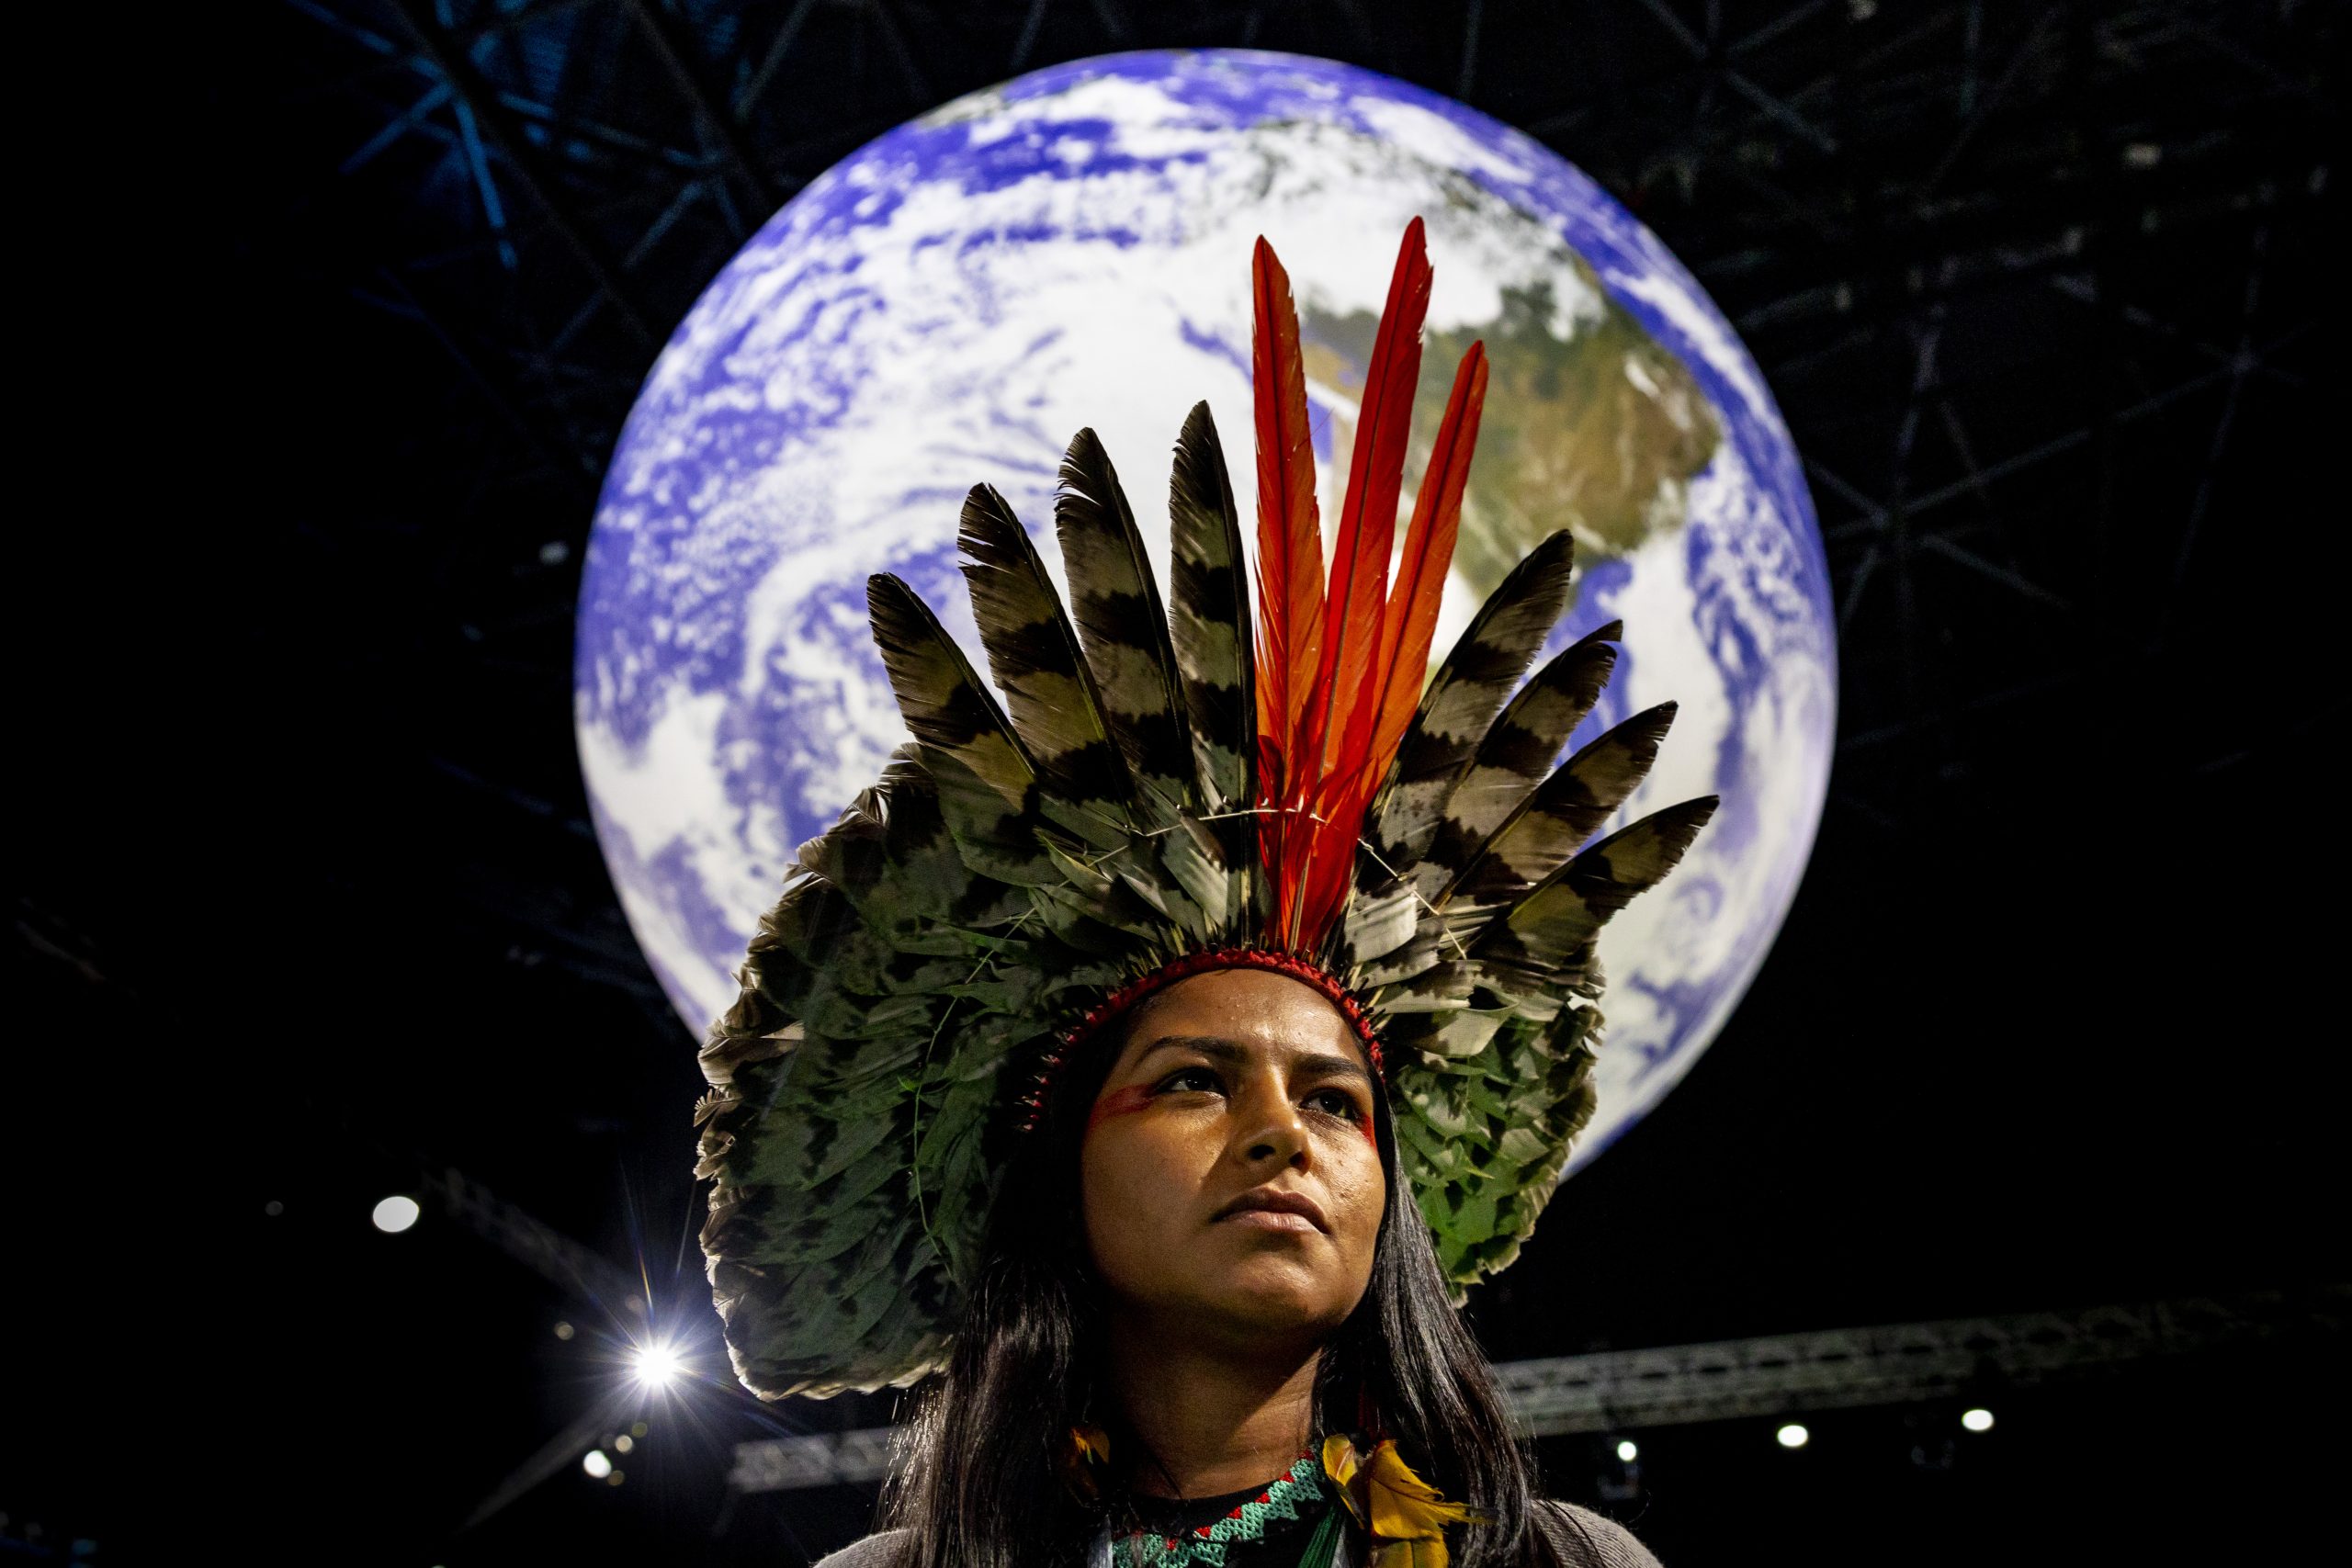 Indigenous leader Juma Xipaia poses in front of an illustration of the Earth.